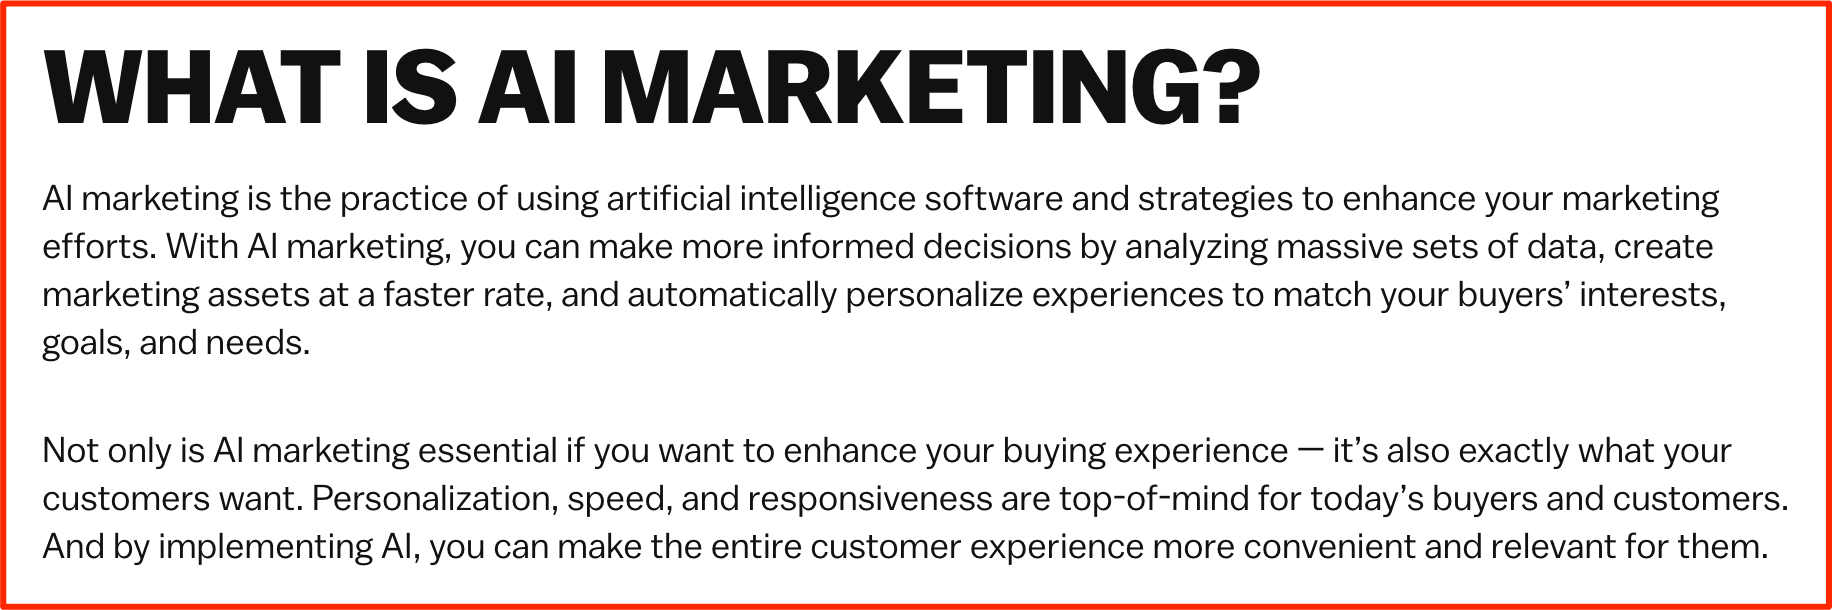 creenshot of an article about AI marketing by the company Drift